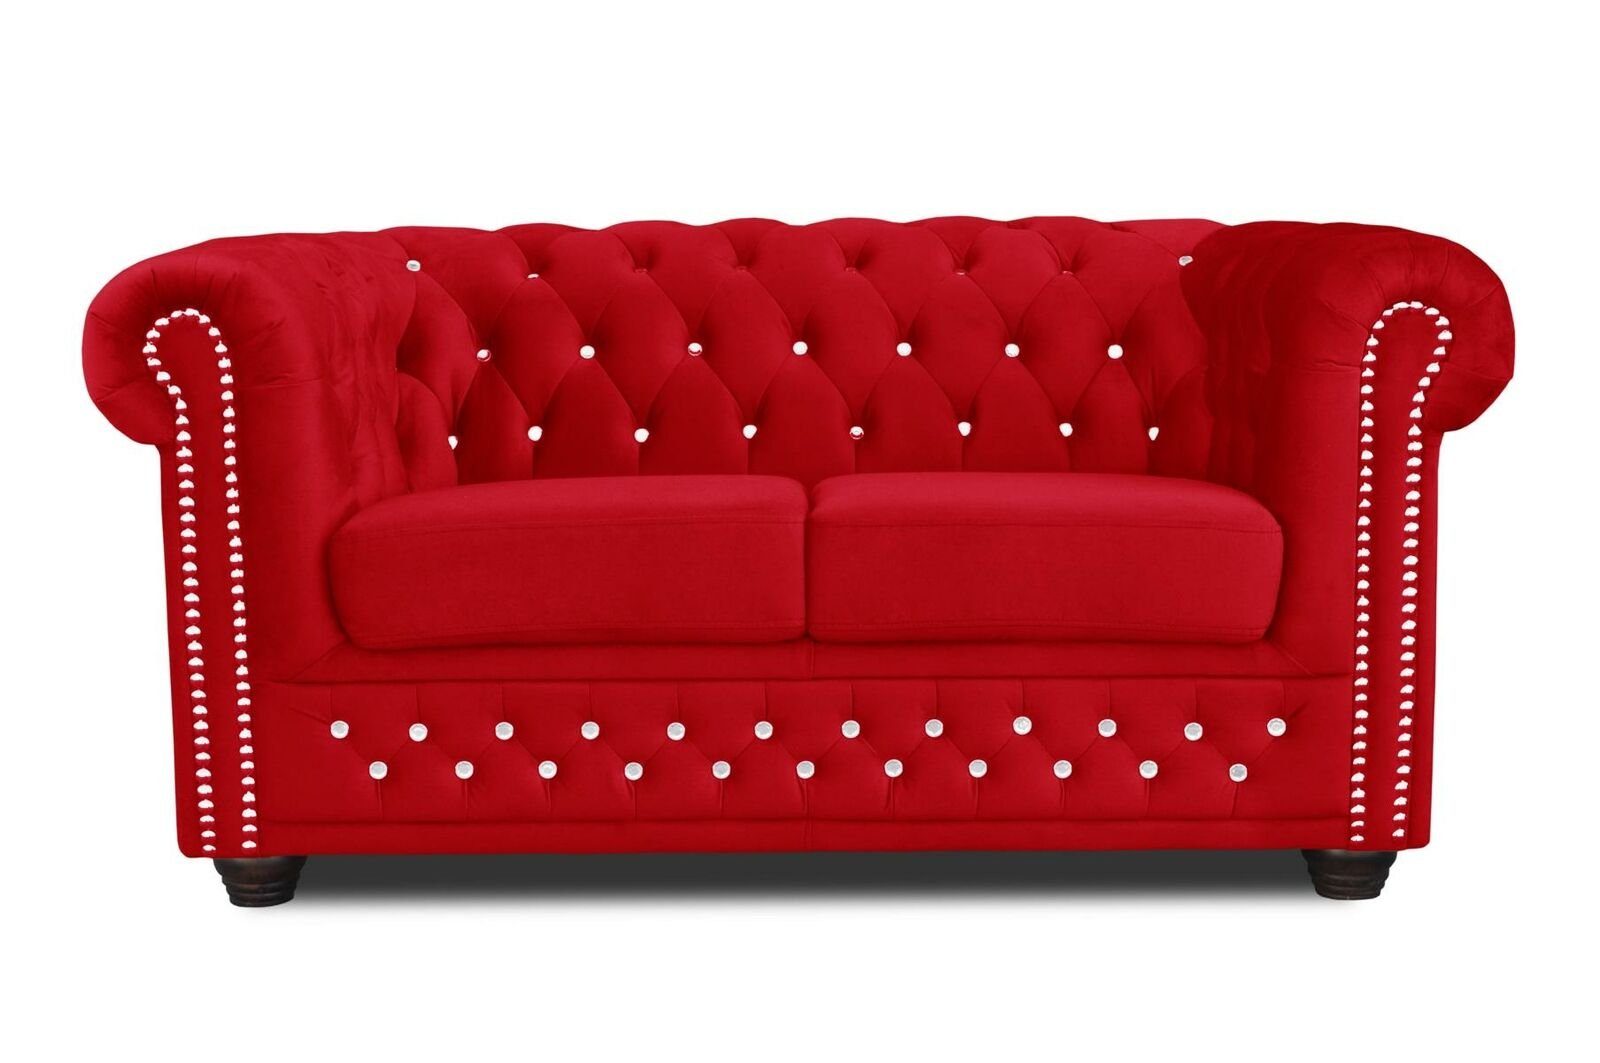 JVmoebel Sofa Roter Couch Stoff Zweisitzer Polster Made Chesterfield Textil in Sofas, Europe